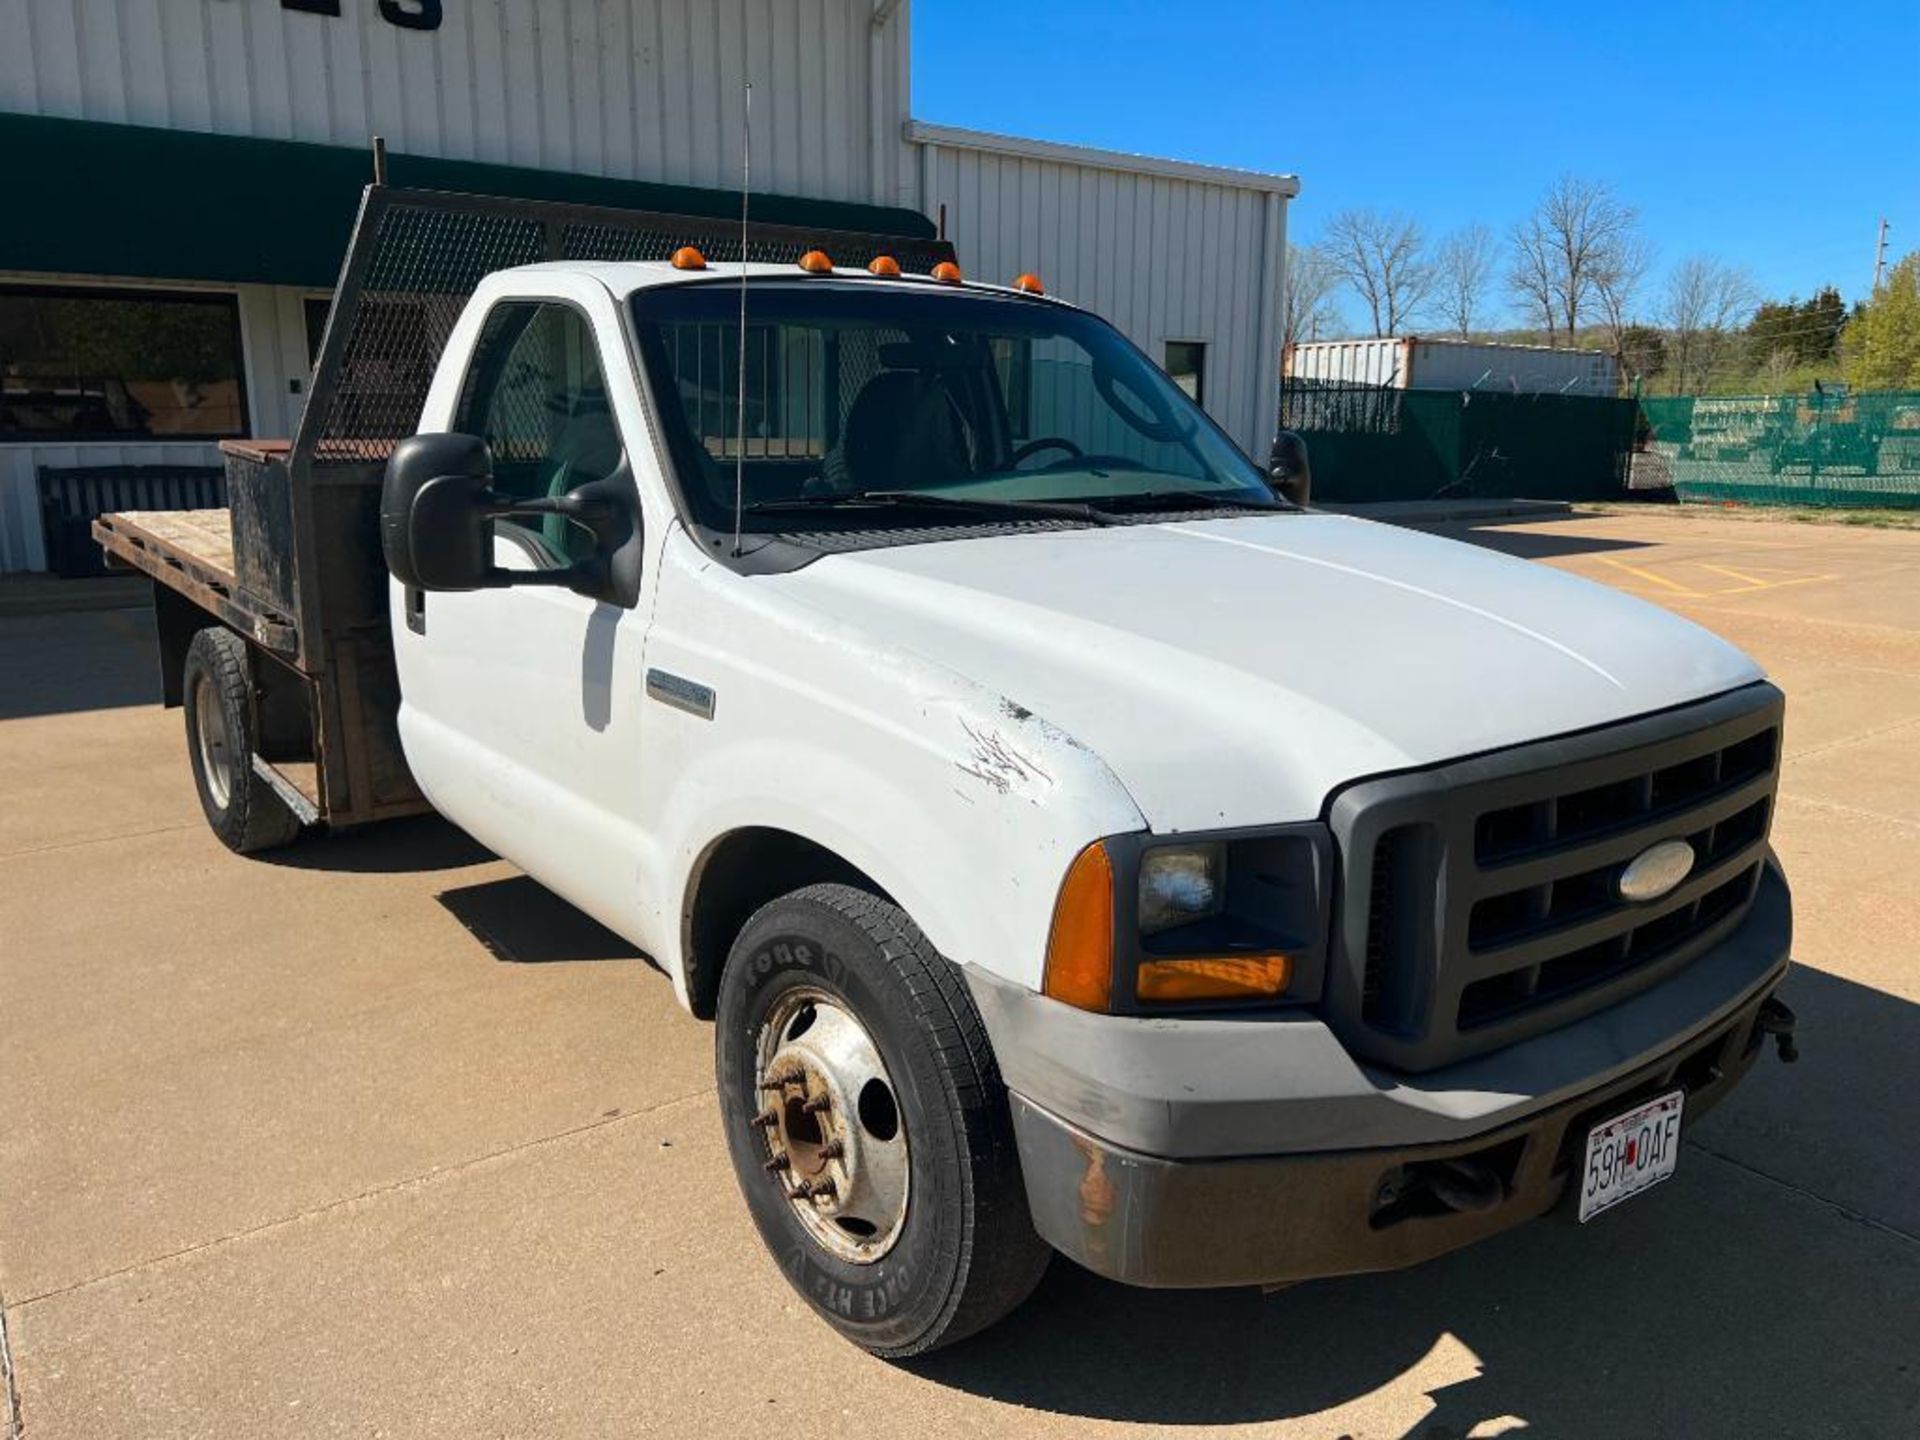 2005 Ford F-350 XL Super Duty Flat Bed Dually Pick up Truck, VIN #1FDWF36P55EA47254, Miles 377,413, - Image 2 of 23